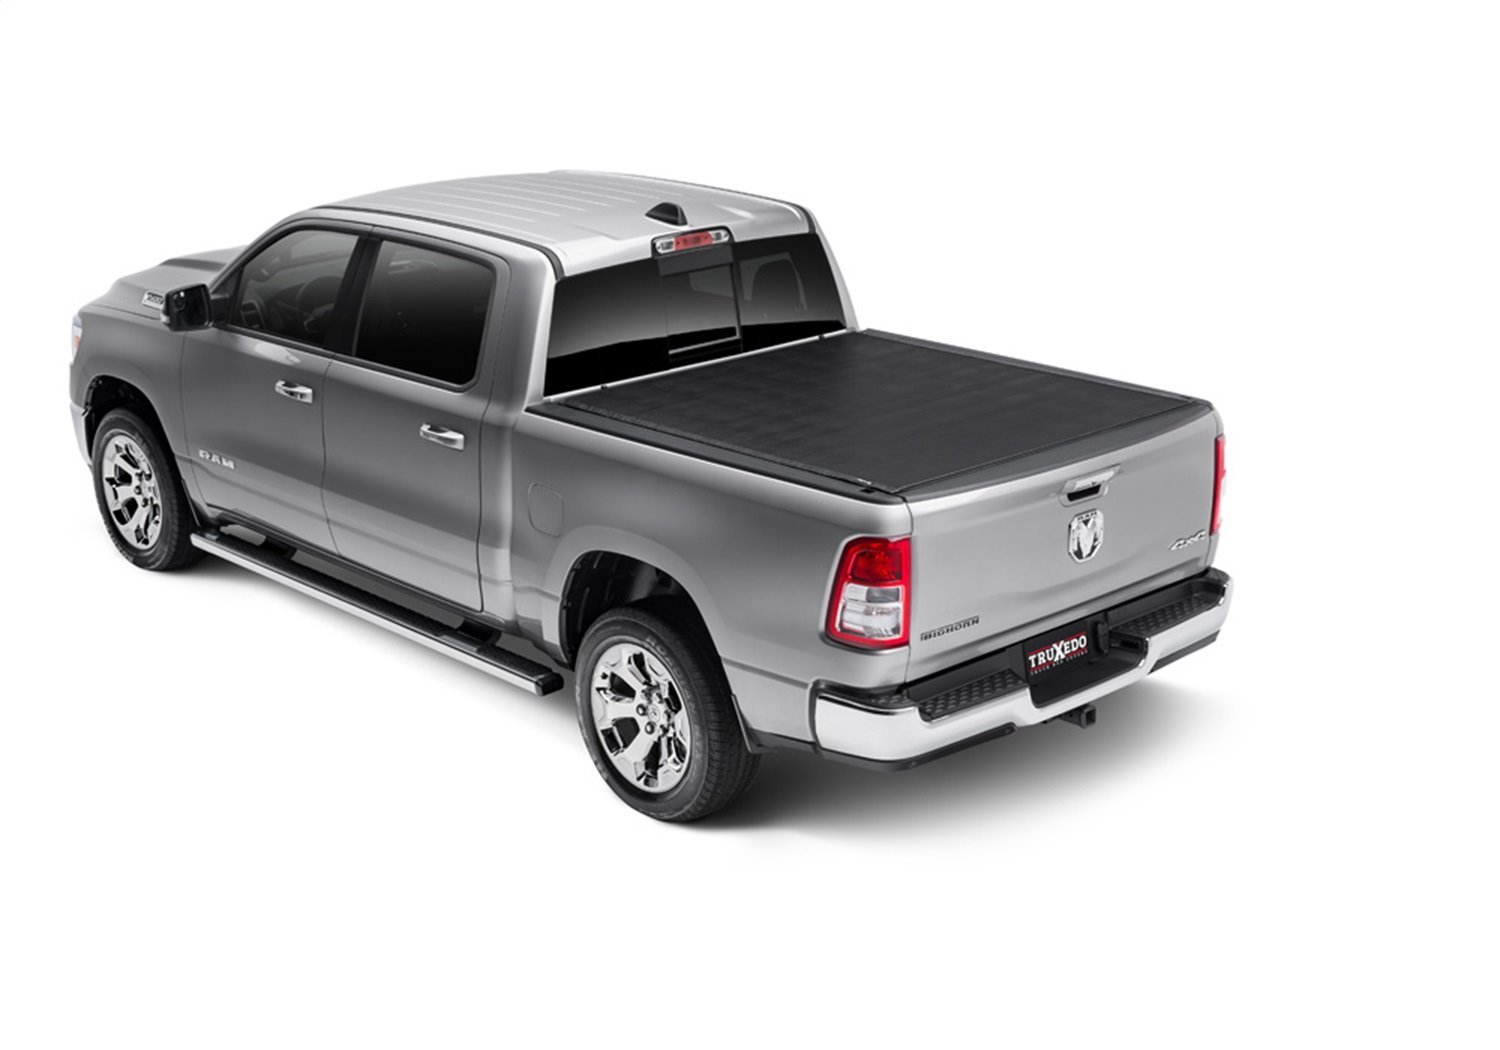 Sentry Roll-Up Tonneau Cover Fits Select Ram 1500 (New Style), With Multifunction Tailgate, Bed Length: 6 ft. 4 in.